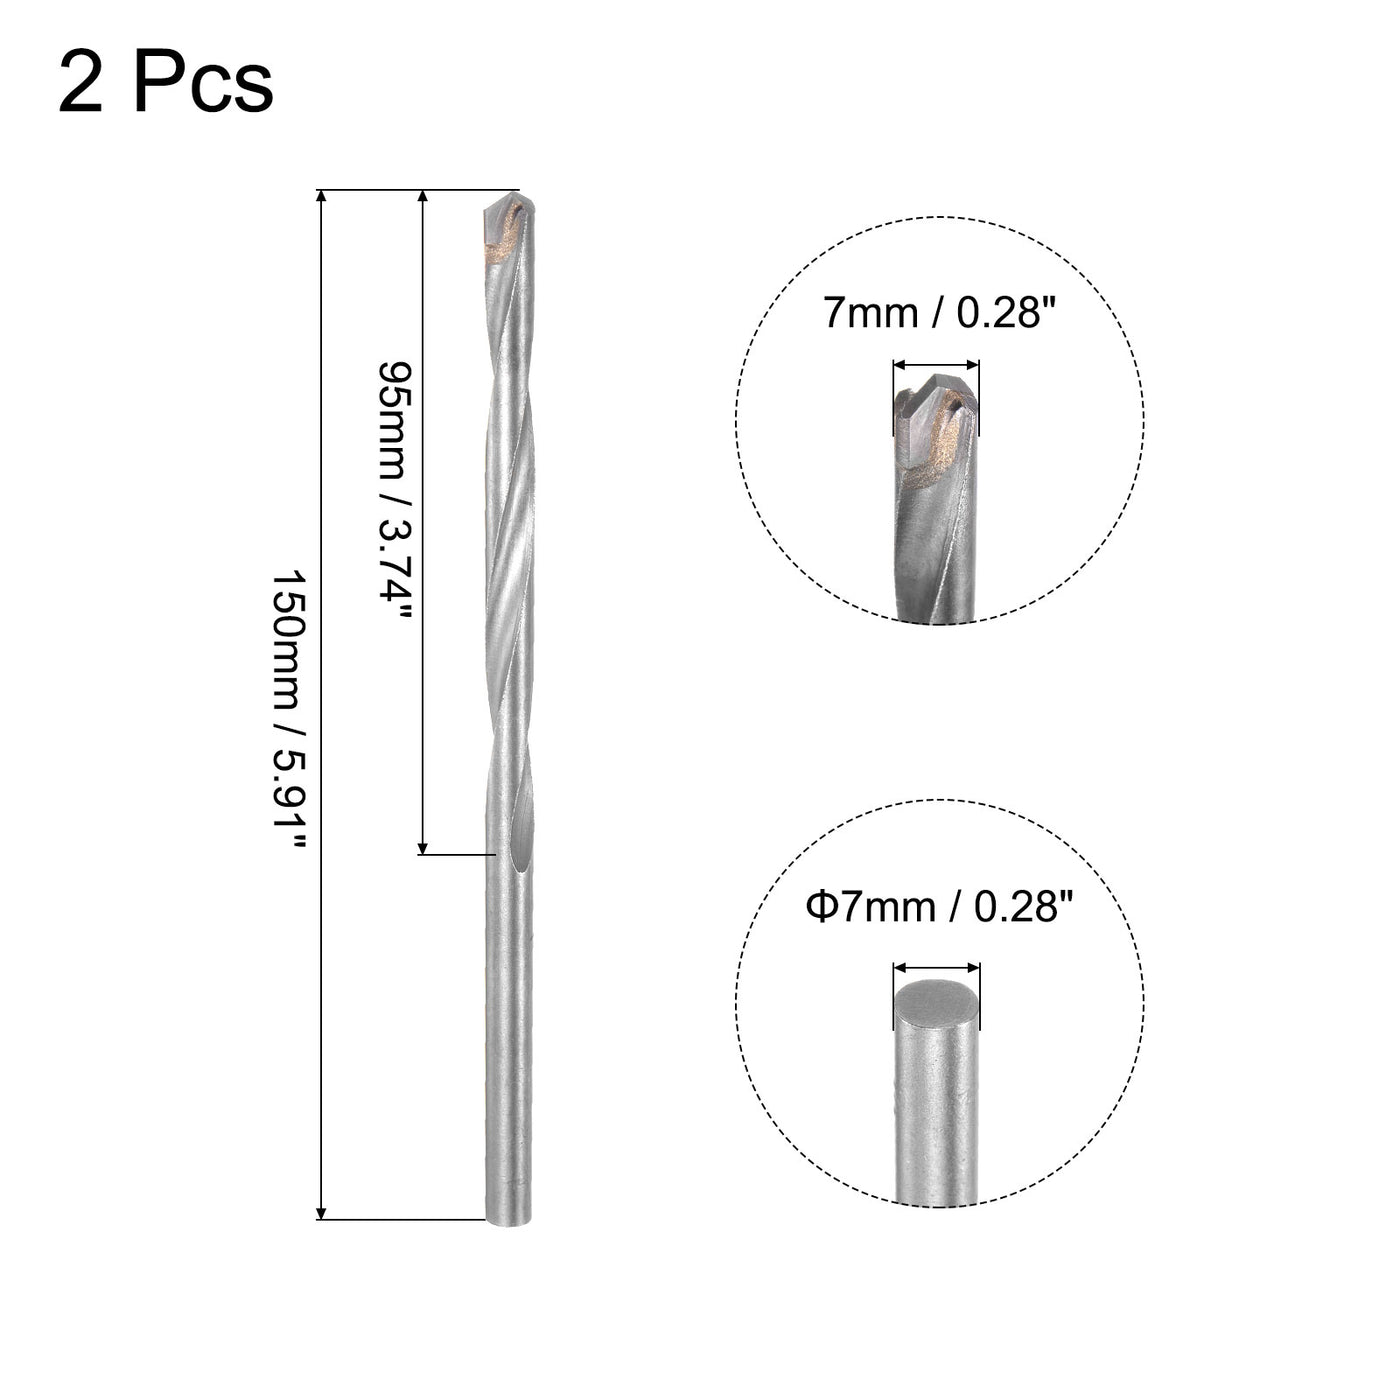 uxcell Uxcell 7mm Cutting Dia Round Shank Cemented Carbide Twist Drill Bit, 150mm Length 2 Pcs